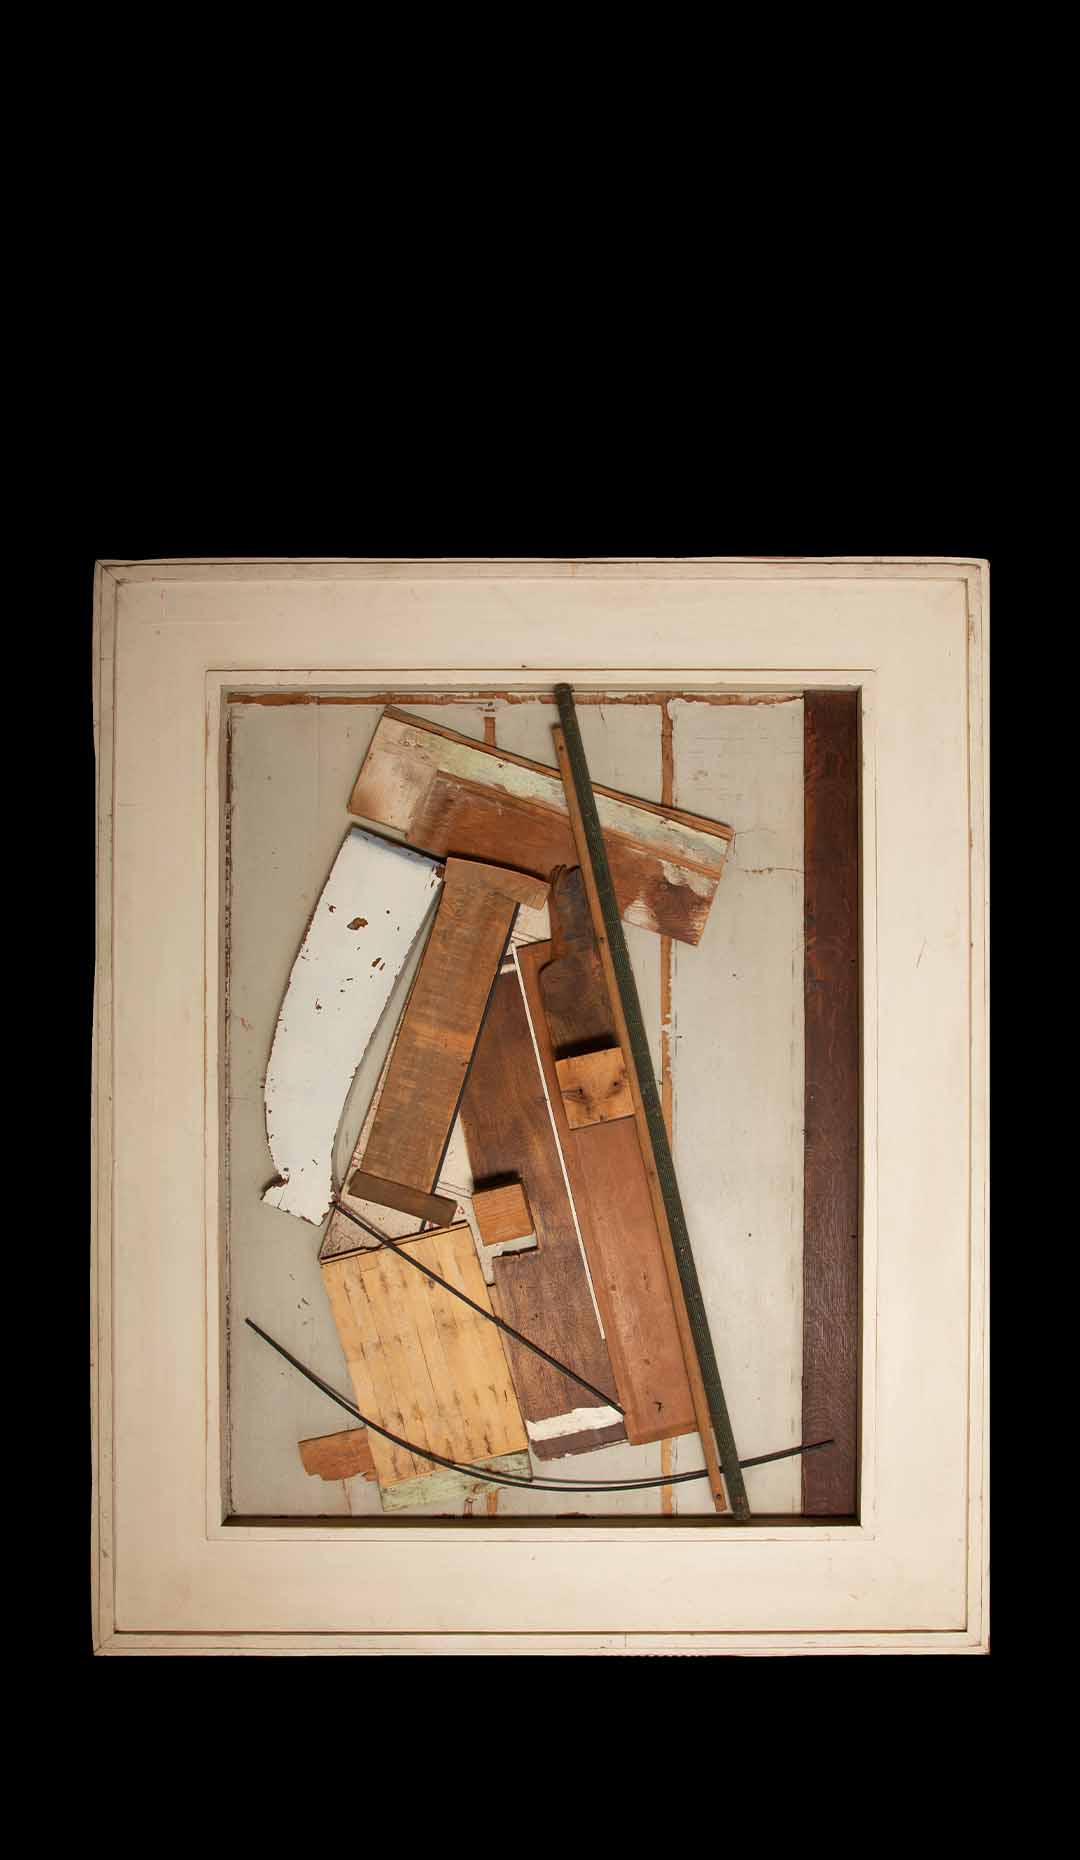 Artistic Fusion: Parquet Panels & Found Objects by Alain Le Yaouanc 66″H